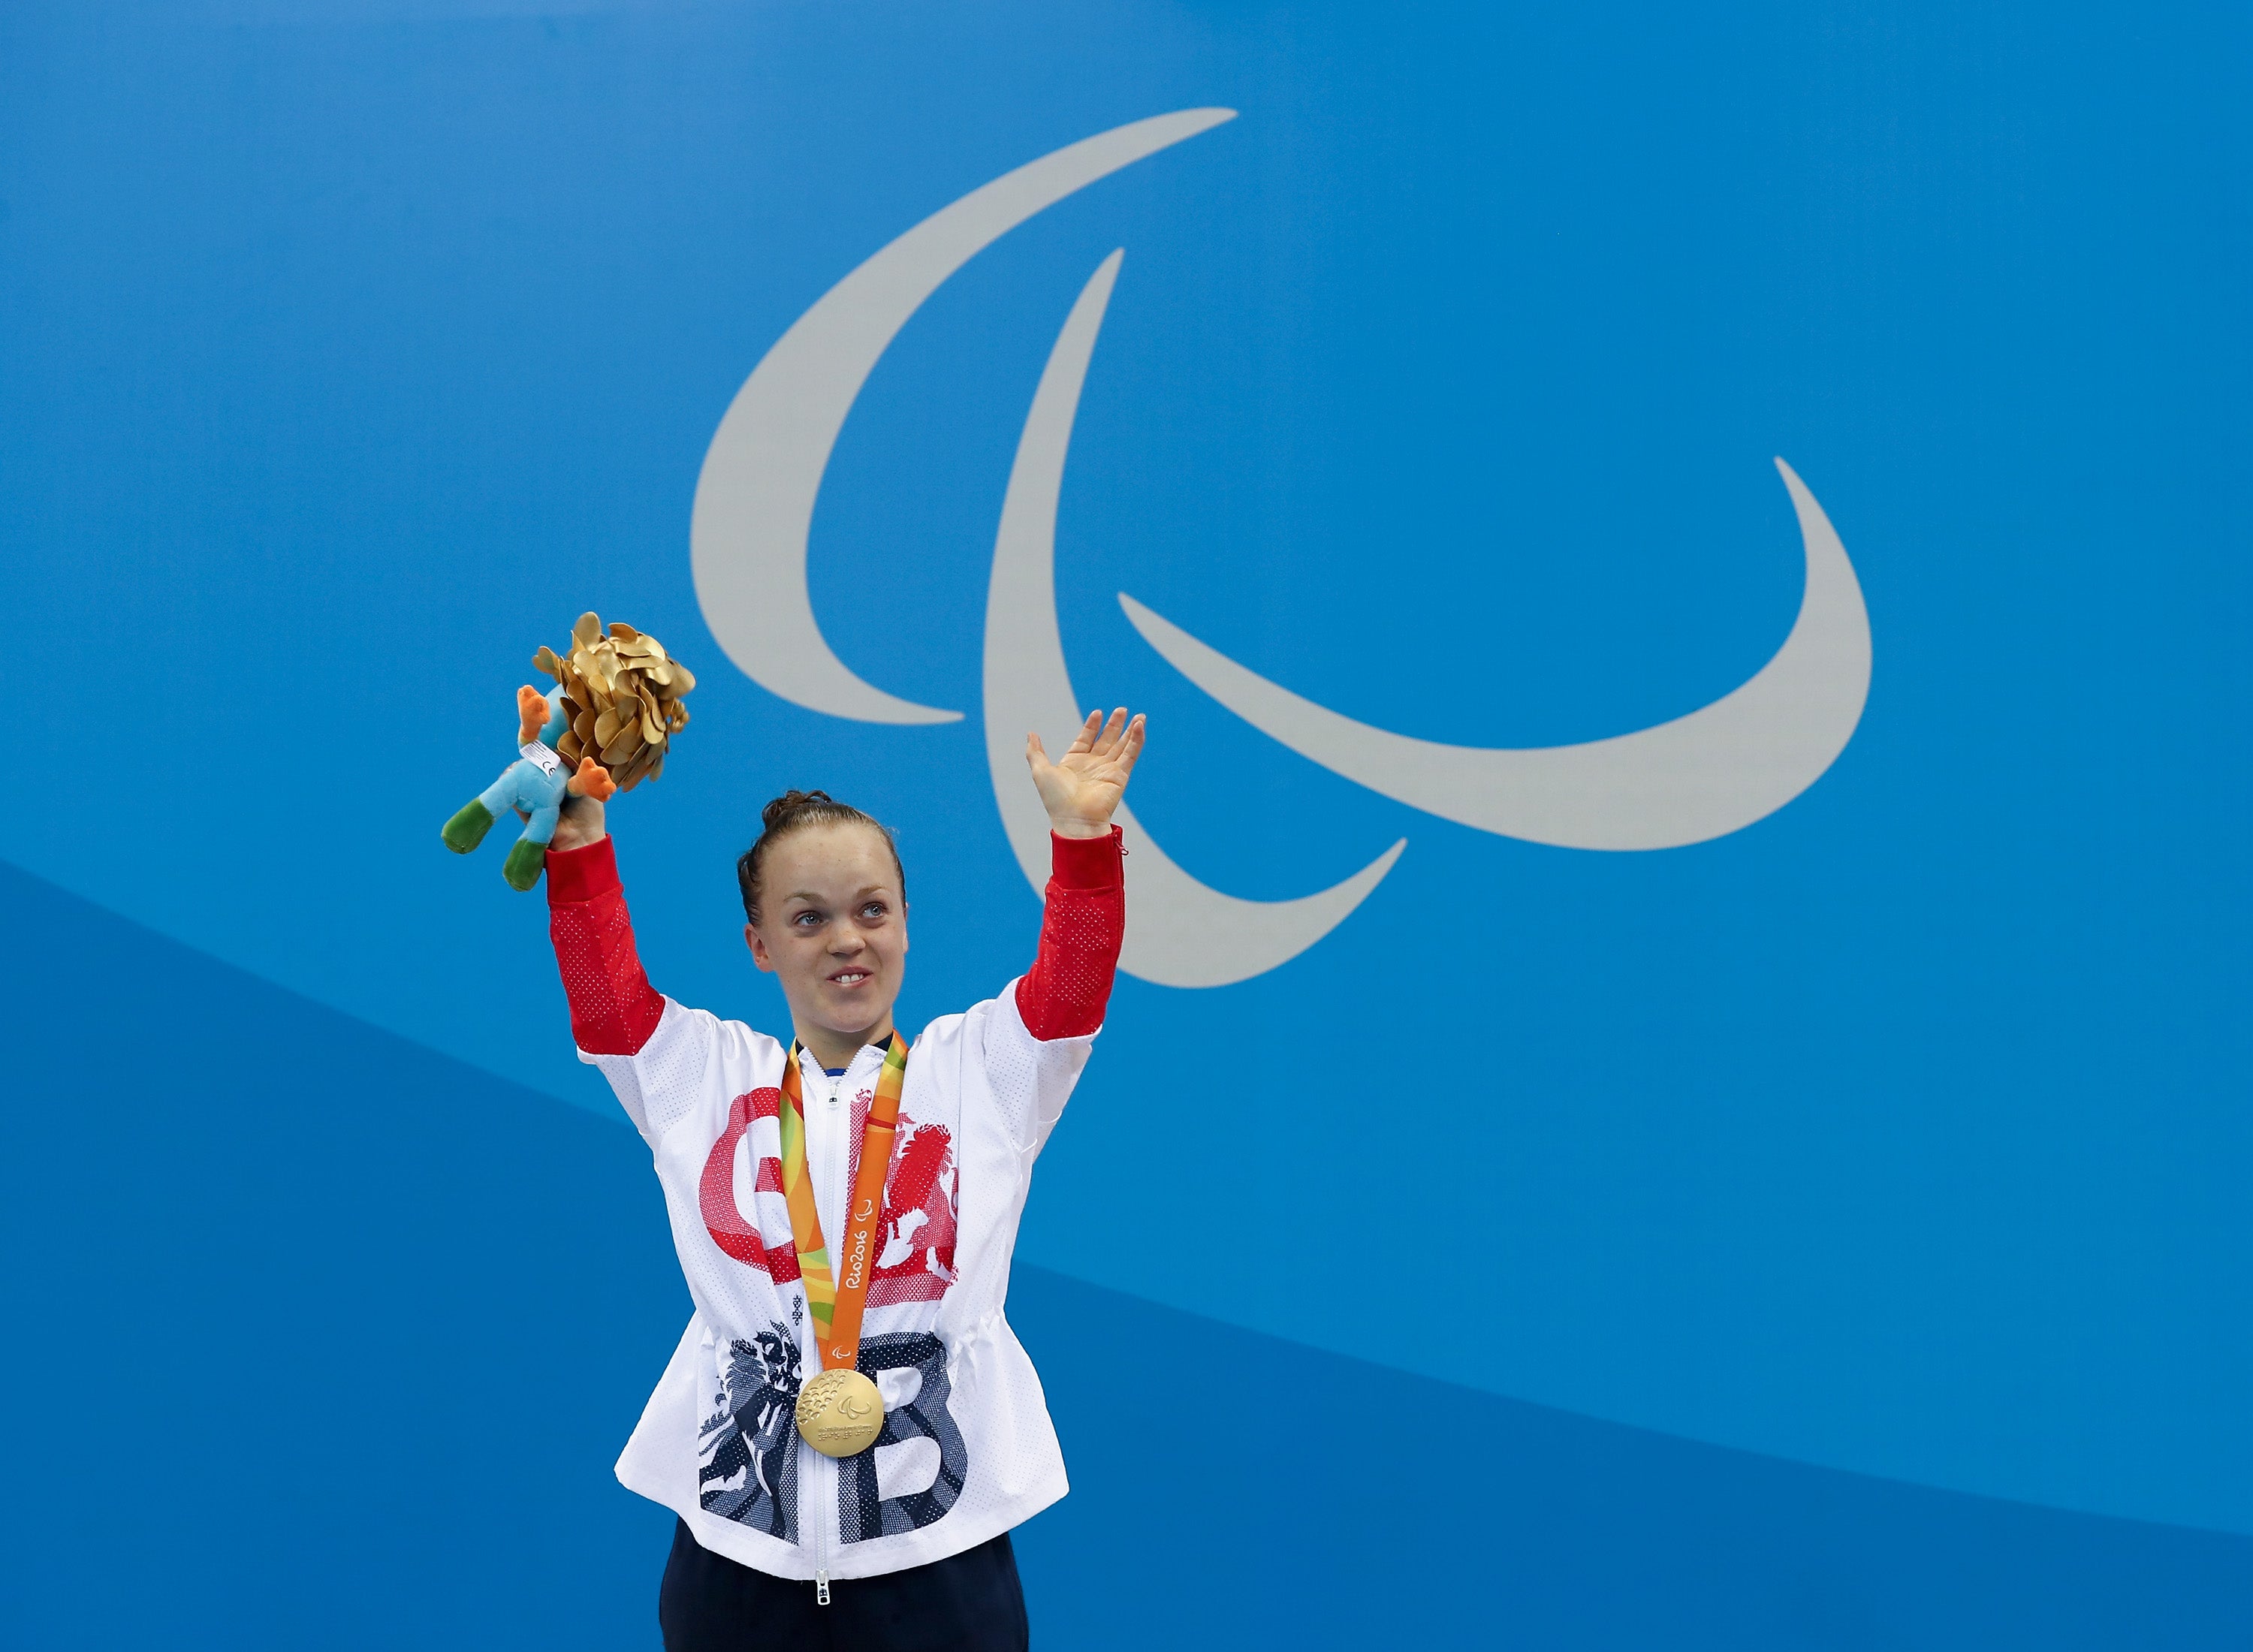 Ellie Simmonds is set for a fourth Paralympics